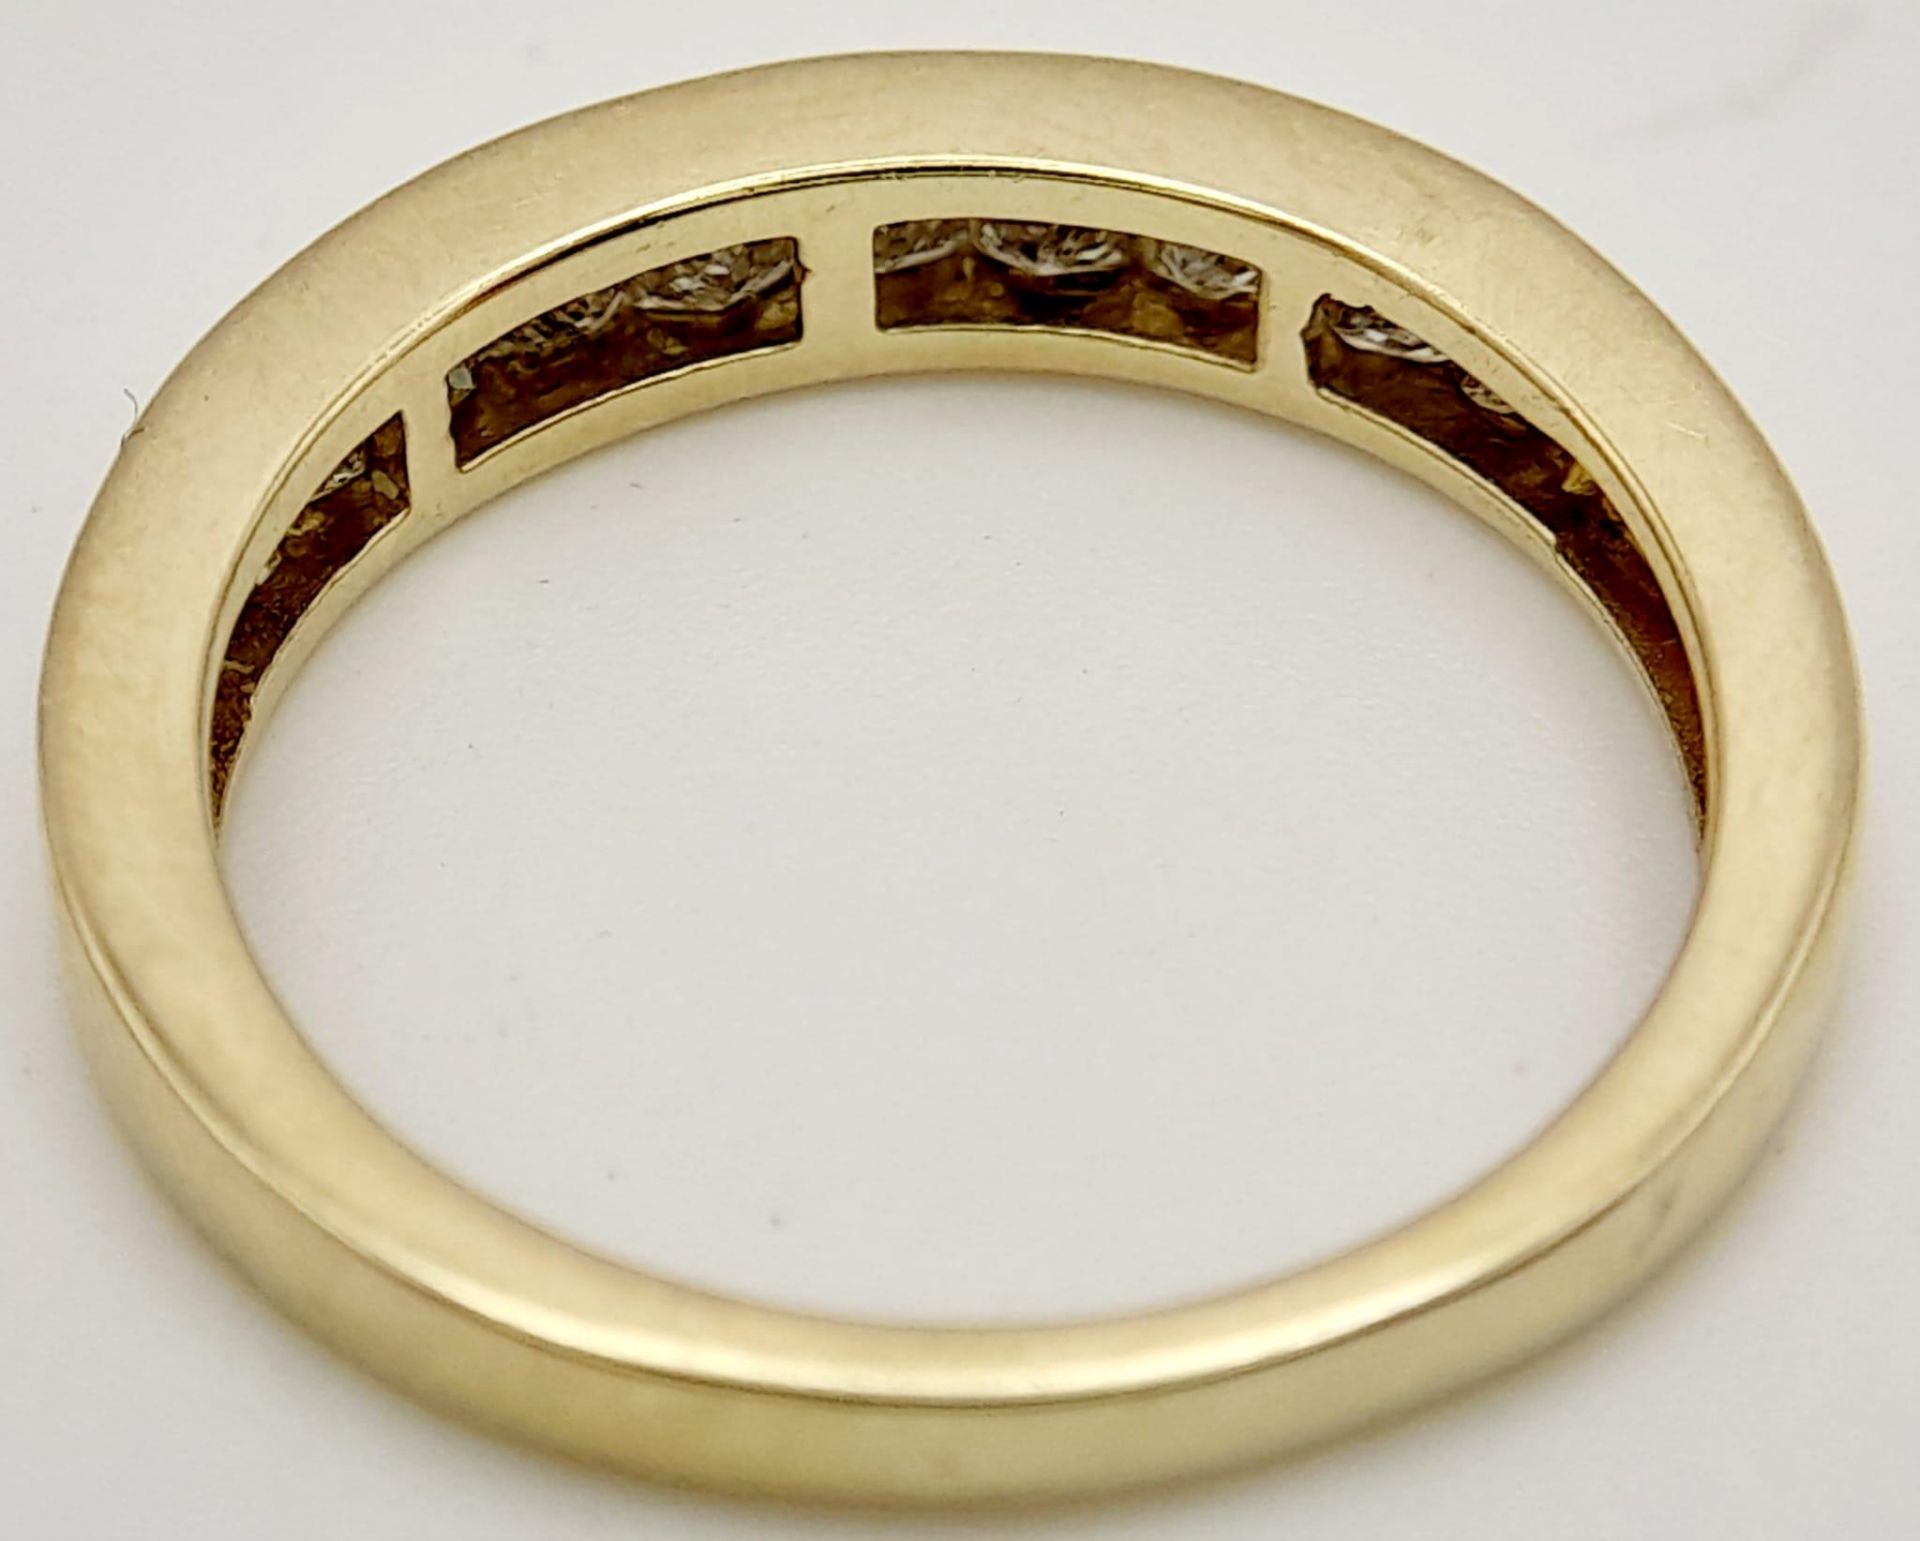 A 9K Yellow Gold Diamond Set Half Eternity Ring. 0.40ctw, Size N, 2.5g total weight. Ref: 8419 - Image 3 of 4